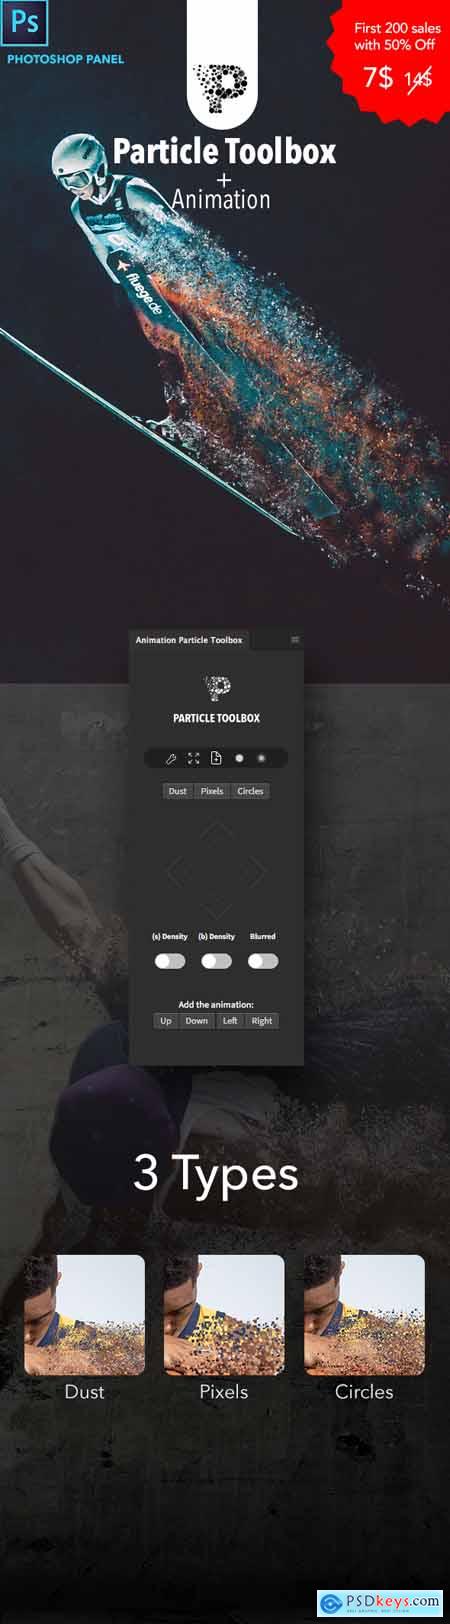 Animation Particle Toolbox Photoshop Panel 25174233